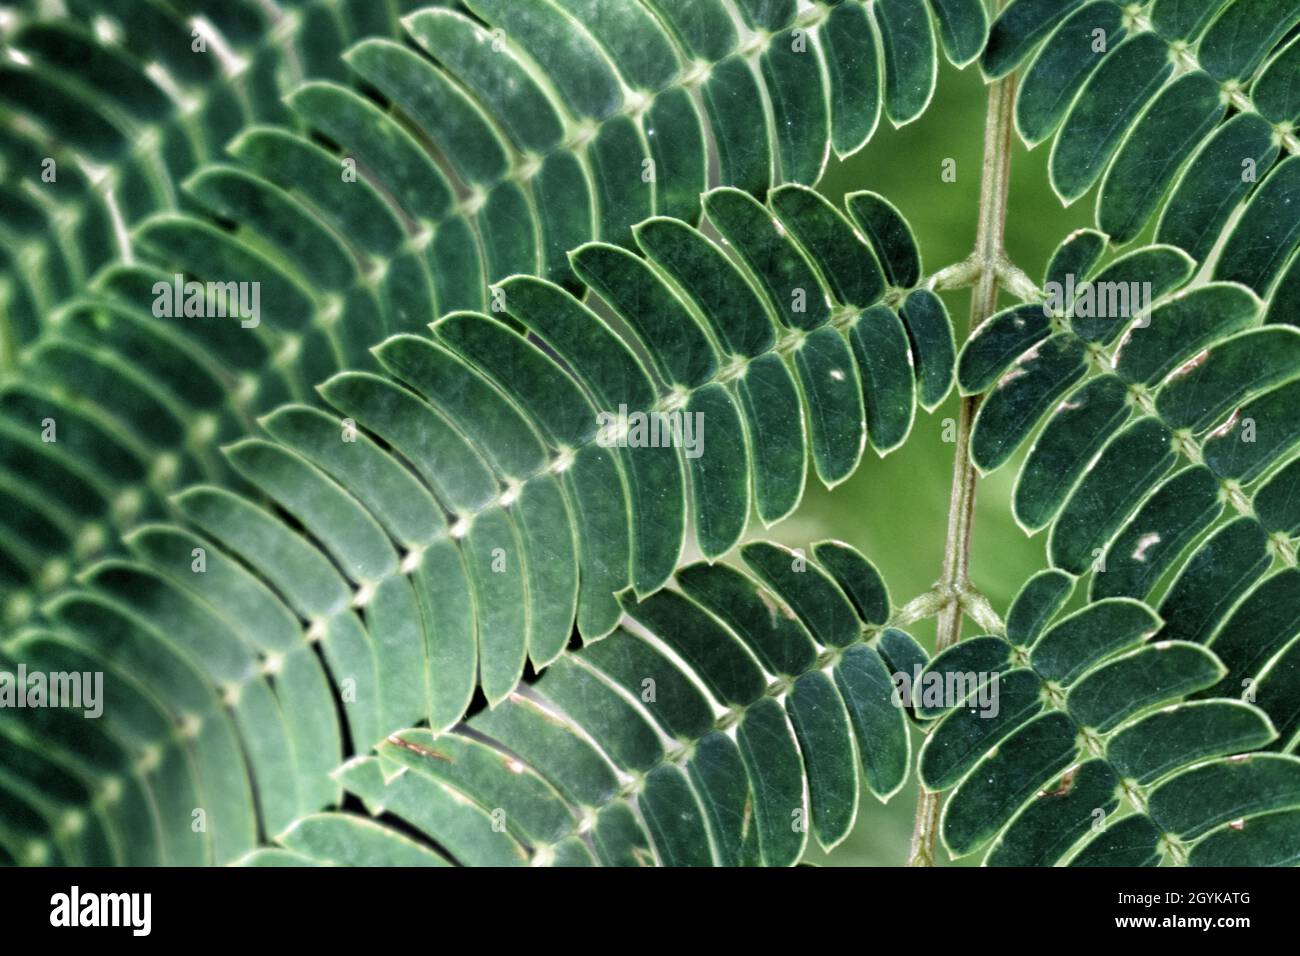 This is a picture of Albizia julibrissin's branches (Albizia) on which you can see the perfect symmetry of its leaves.This is the perfection in nature. Stock Photo